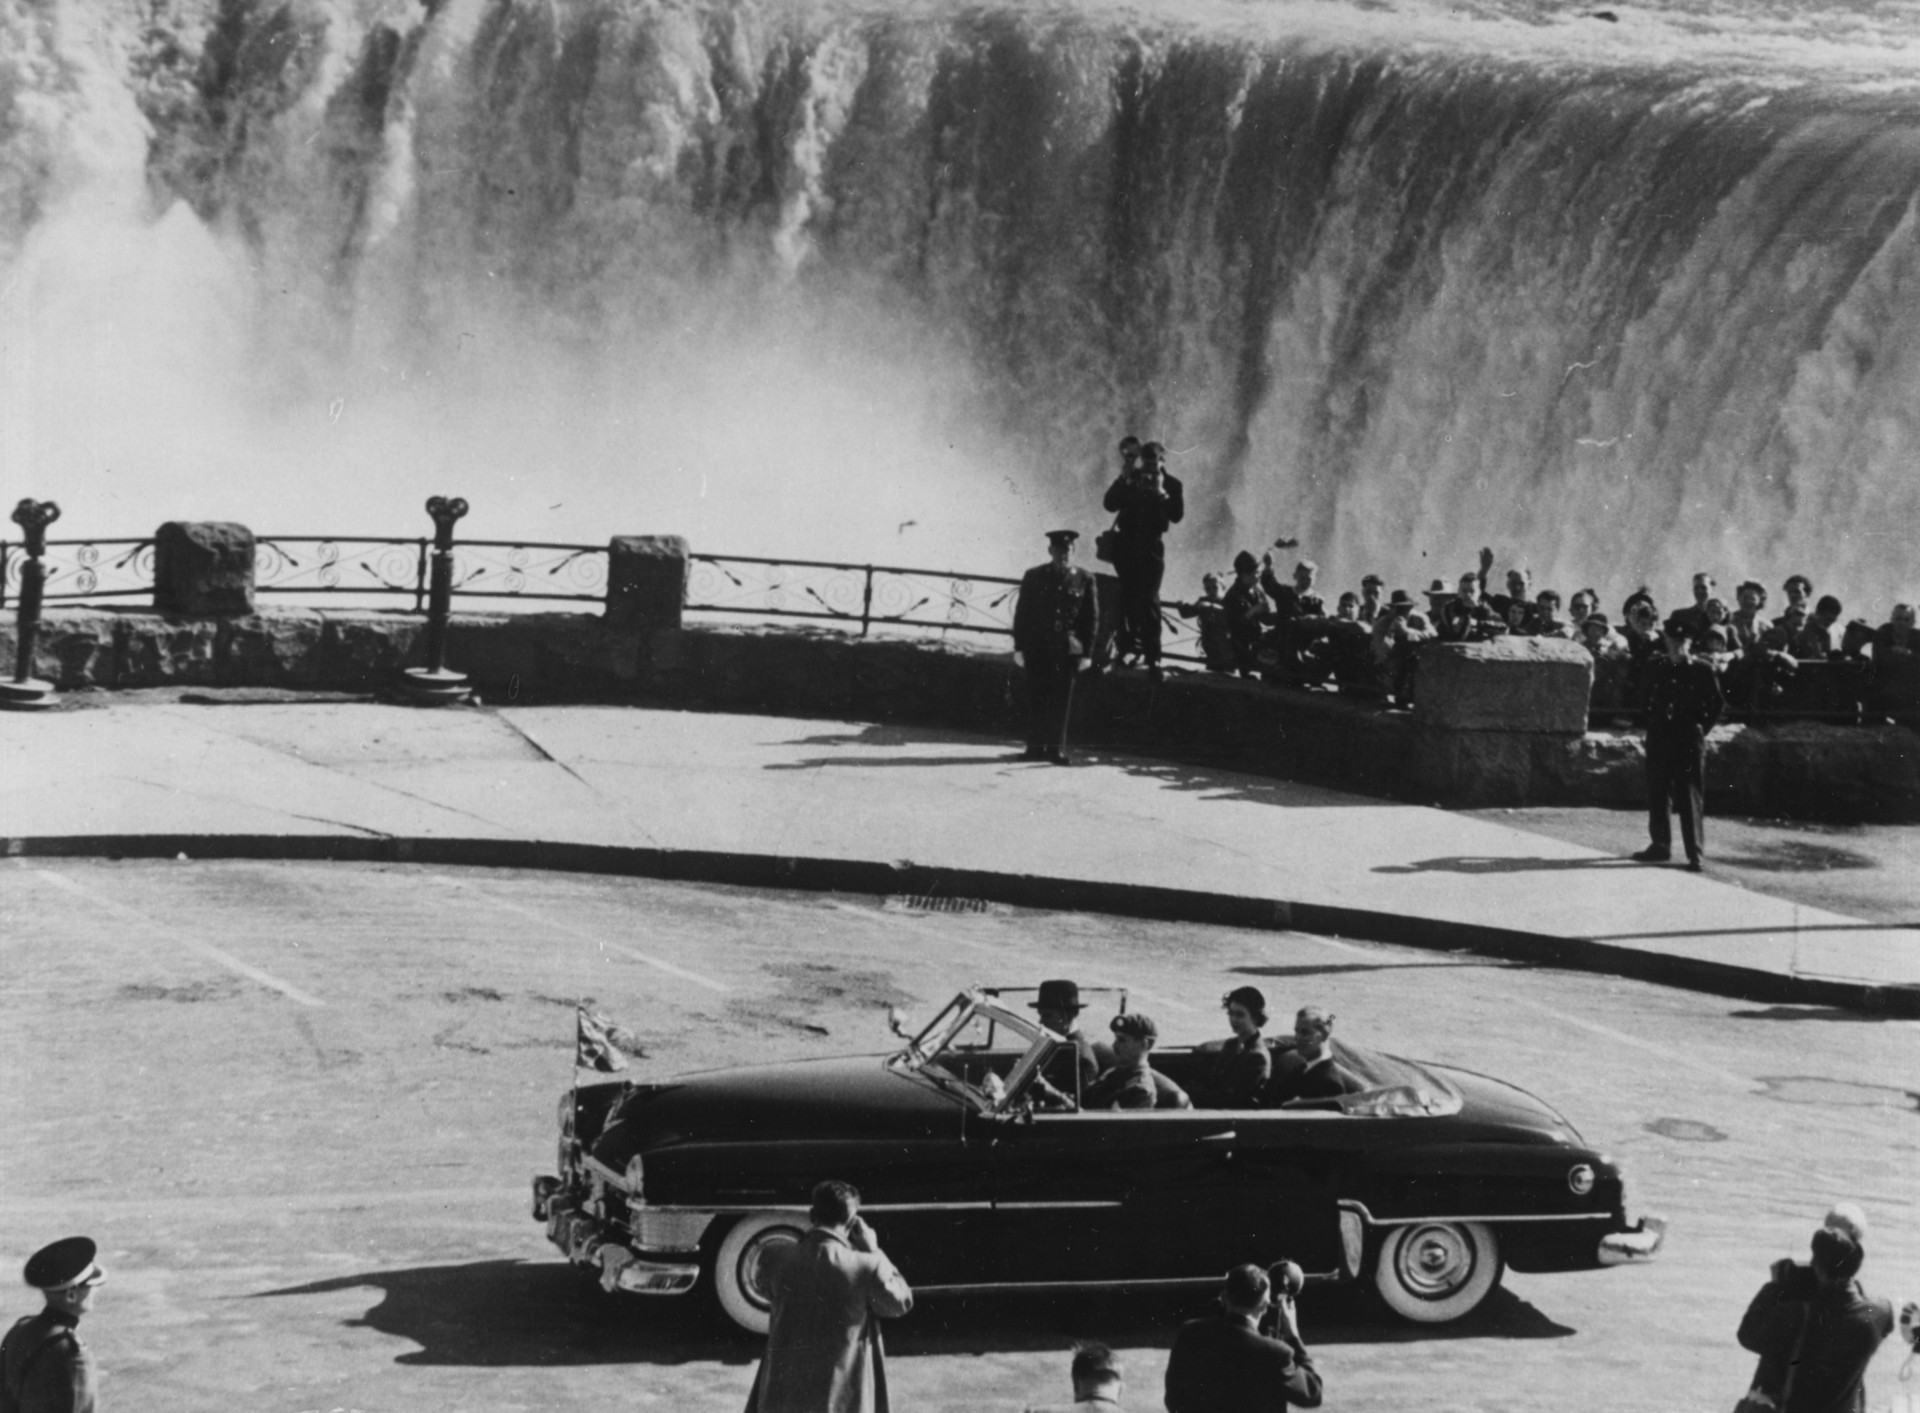 At Niagara Falls during the royal couple's tour of Canada. Note the respectable distance kept by the press corps.<p>You may also like:<a href="https://www.starsinsider.com/n/455648?utm_source=msn.com&utm_medium=display&utm_campaign=referral_description&utm_content=203154v10en-au"> On-screen couples with zero chemistry</a></p>